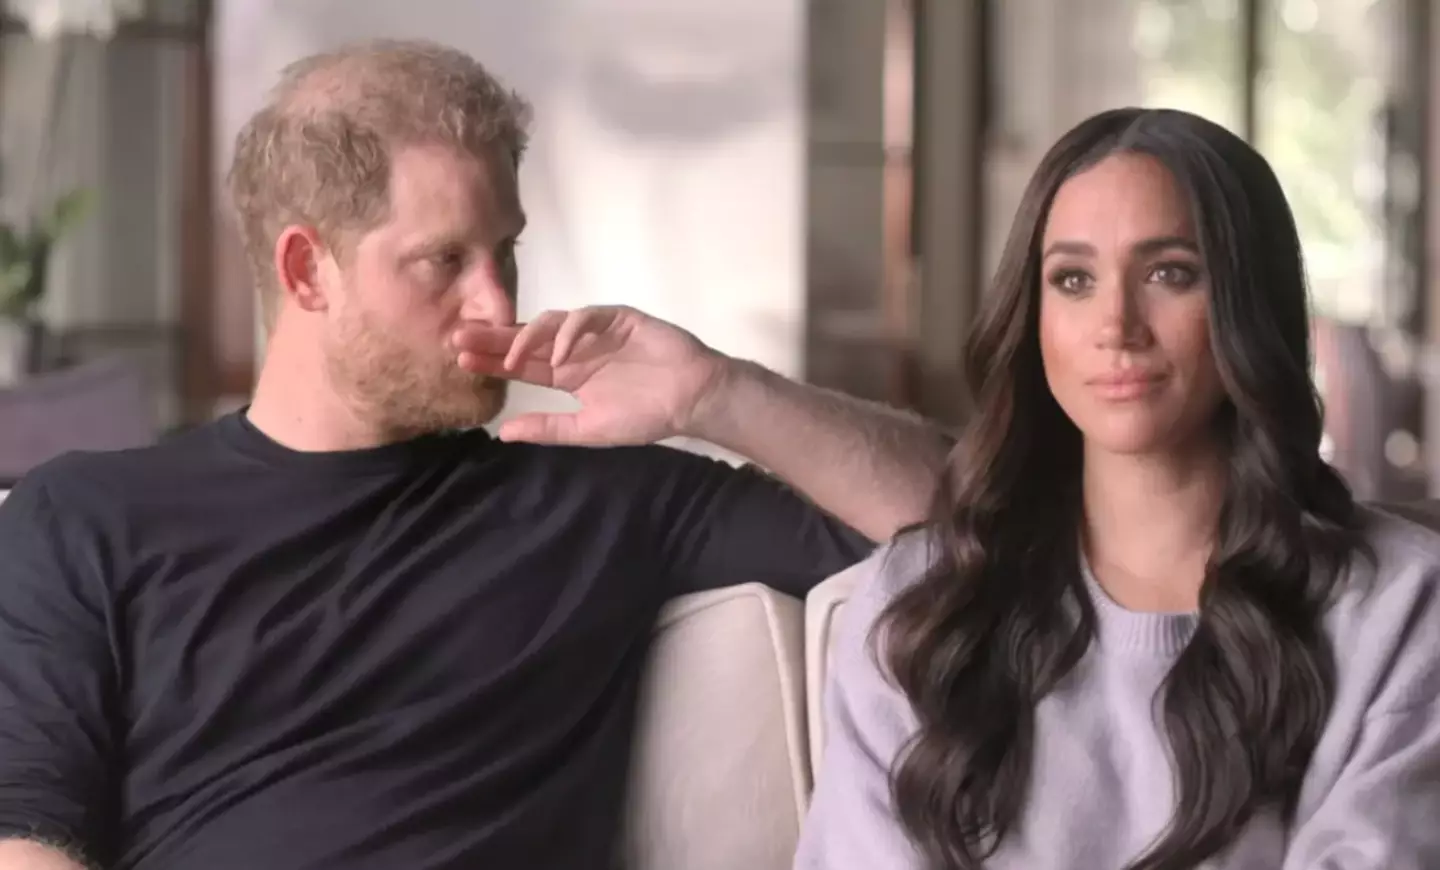 Meghan Markle clearly lives rent free in Jeremy Clarkson's head.